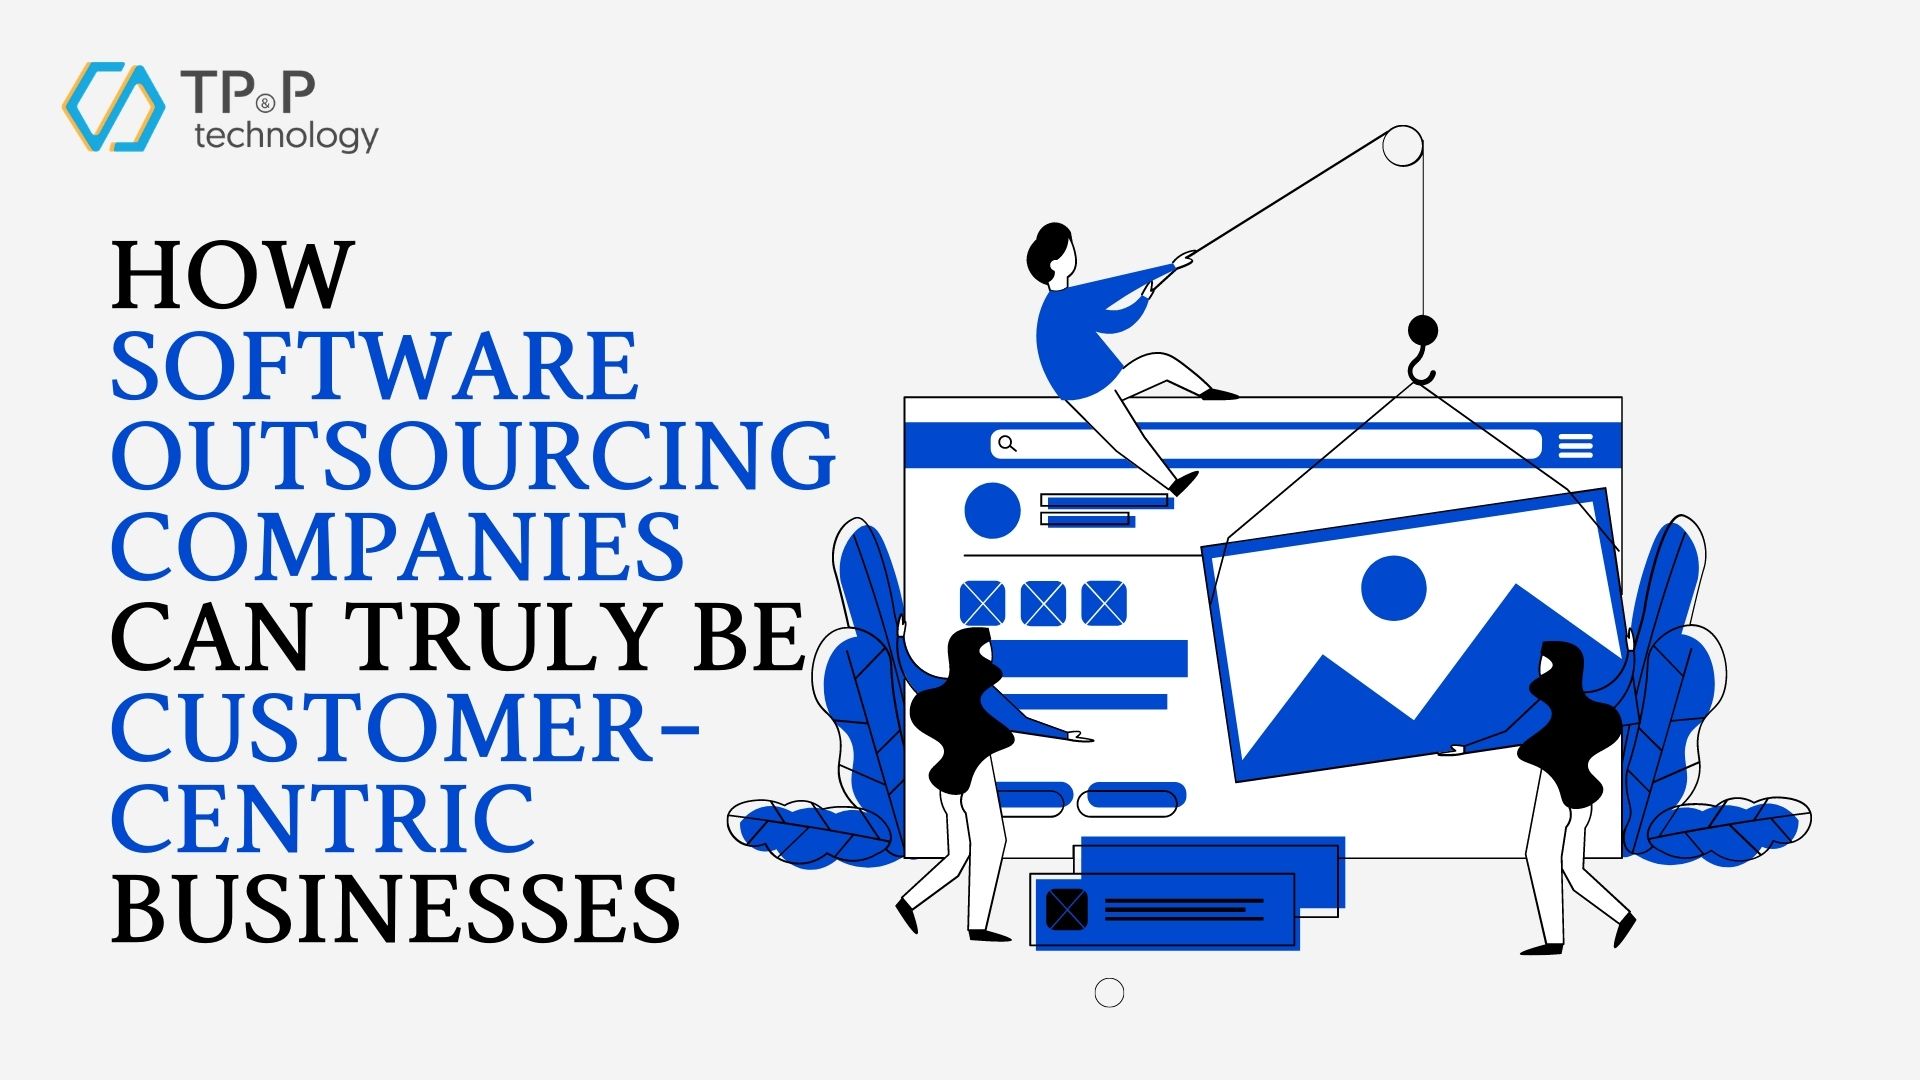 How Software Outsourcing Companies Can Truly Be Customer-Centric Businesses